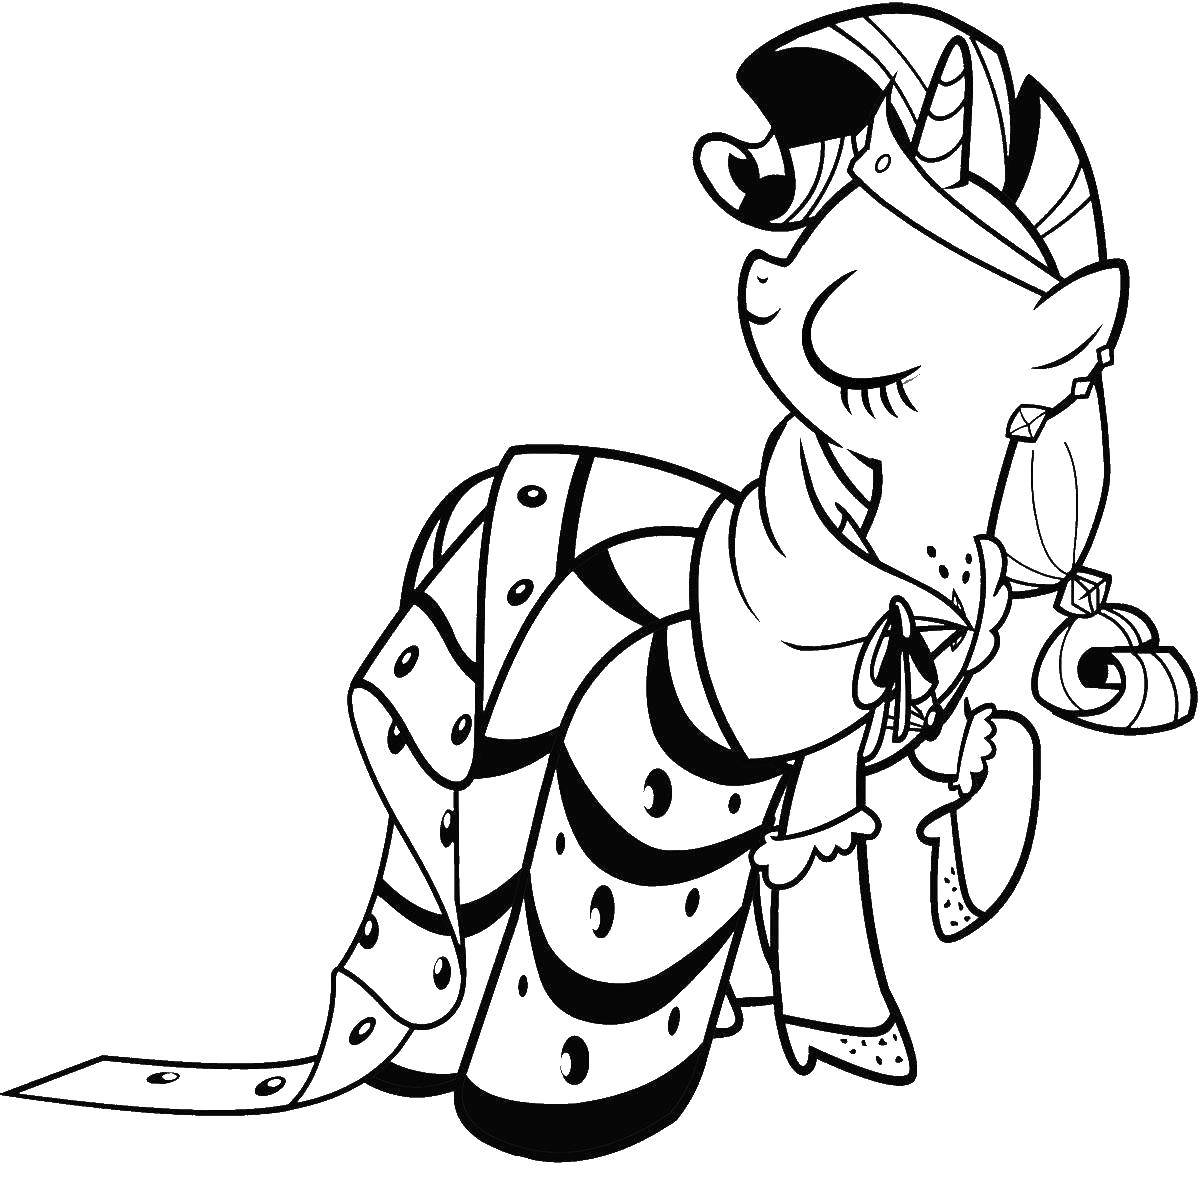 Coloring The fashionista pony. Category my little pony. Tags:  Pony, My little pony.